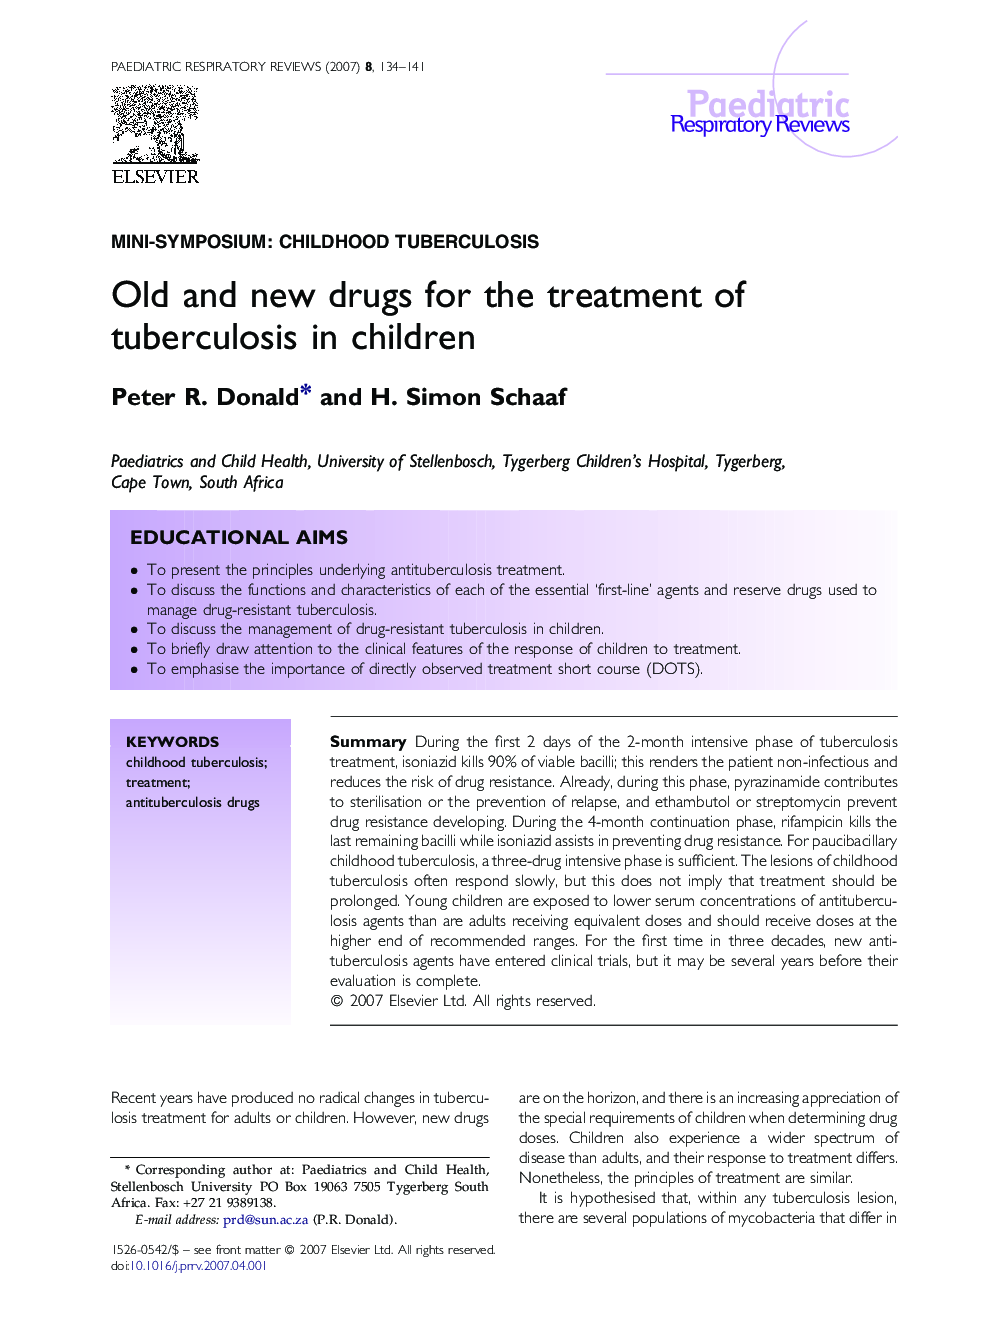 Old and new drugs for the treatment of tuberculosis in children